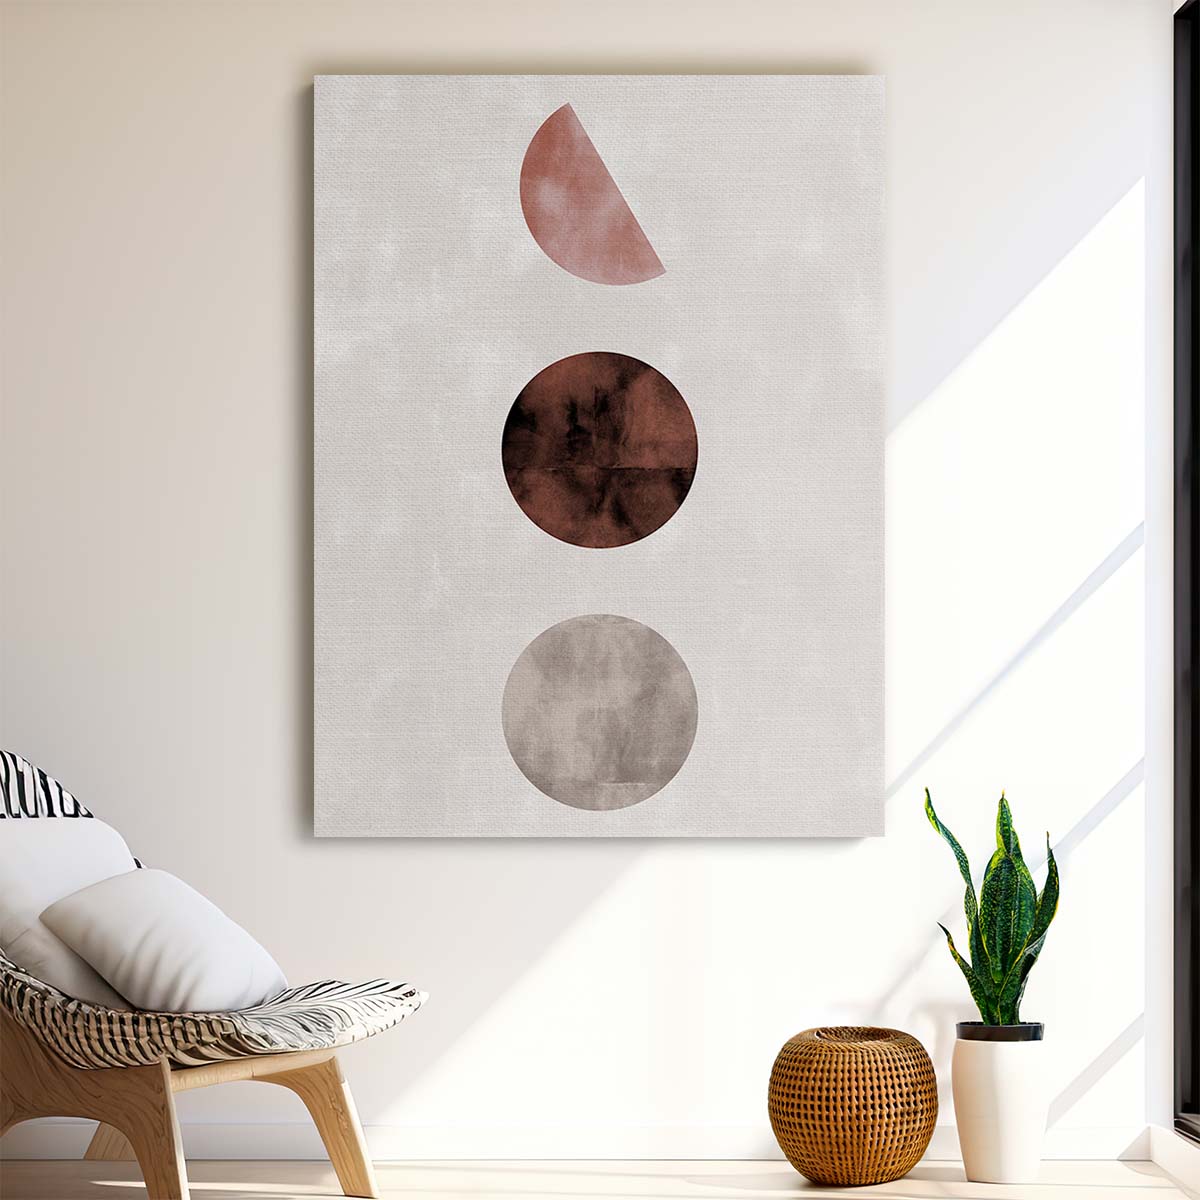 Abstract Geometric Space Planets Circle Illustration Wall Art by Luxuriance Designs, made in USA